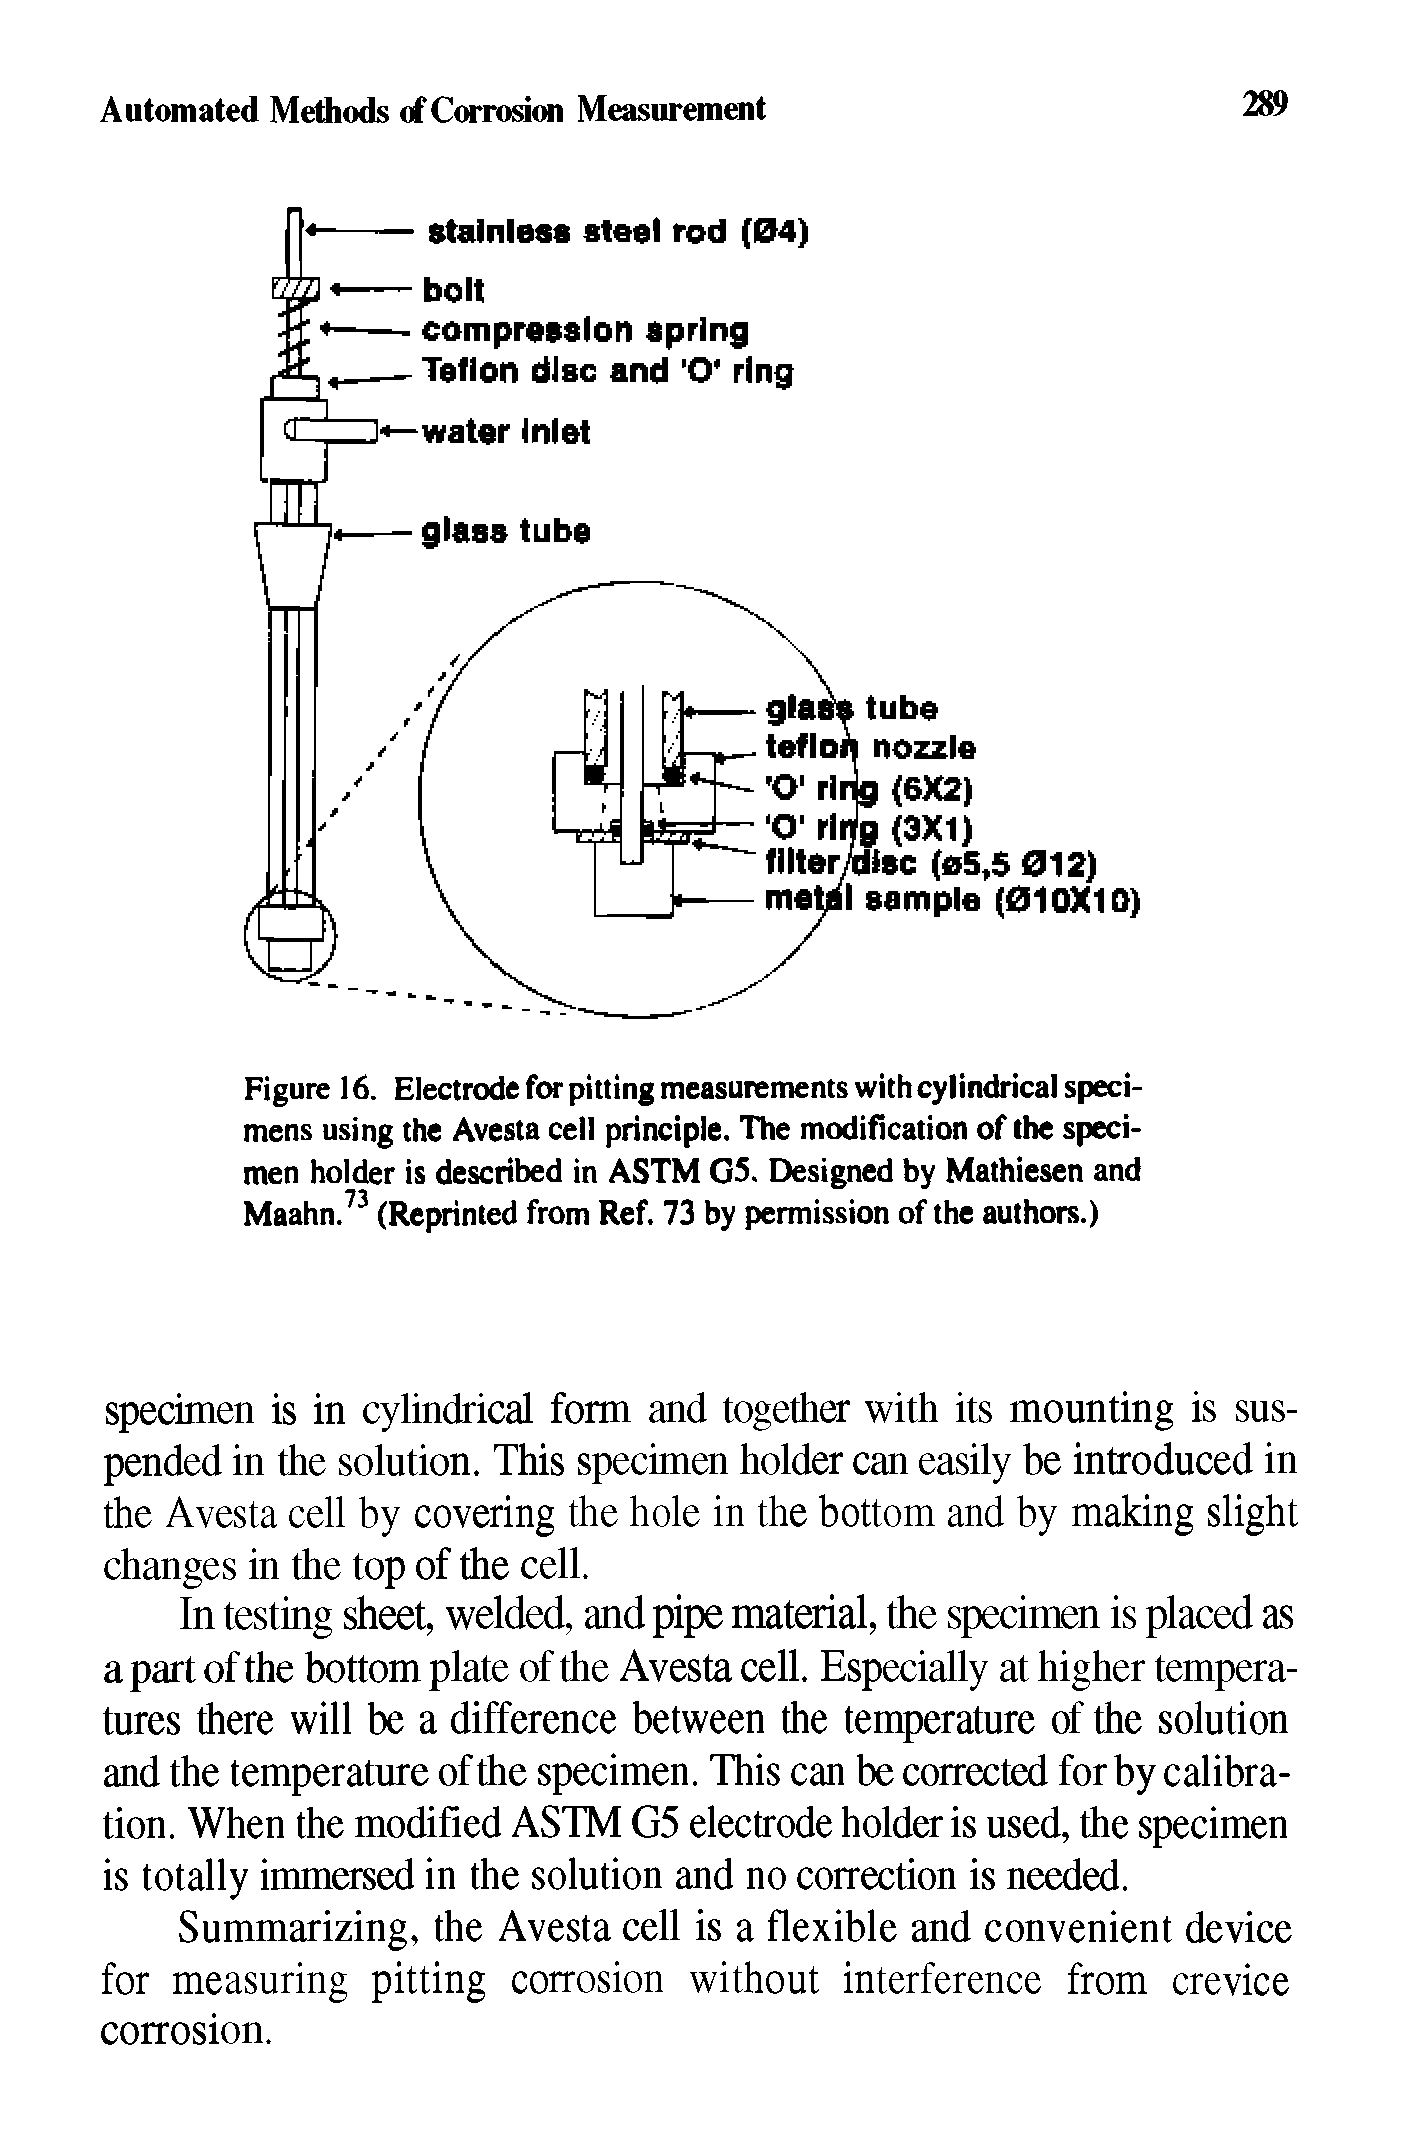 Figure 16. Electrode for pitting measurements with cylindrical specimens using the Avesta cell principle. The modification of the specimen holder is described in ASTM GS. Designed by Mathiesen and Maahn. (Reprinted from Ref. 73 by permission of the authors.)...